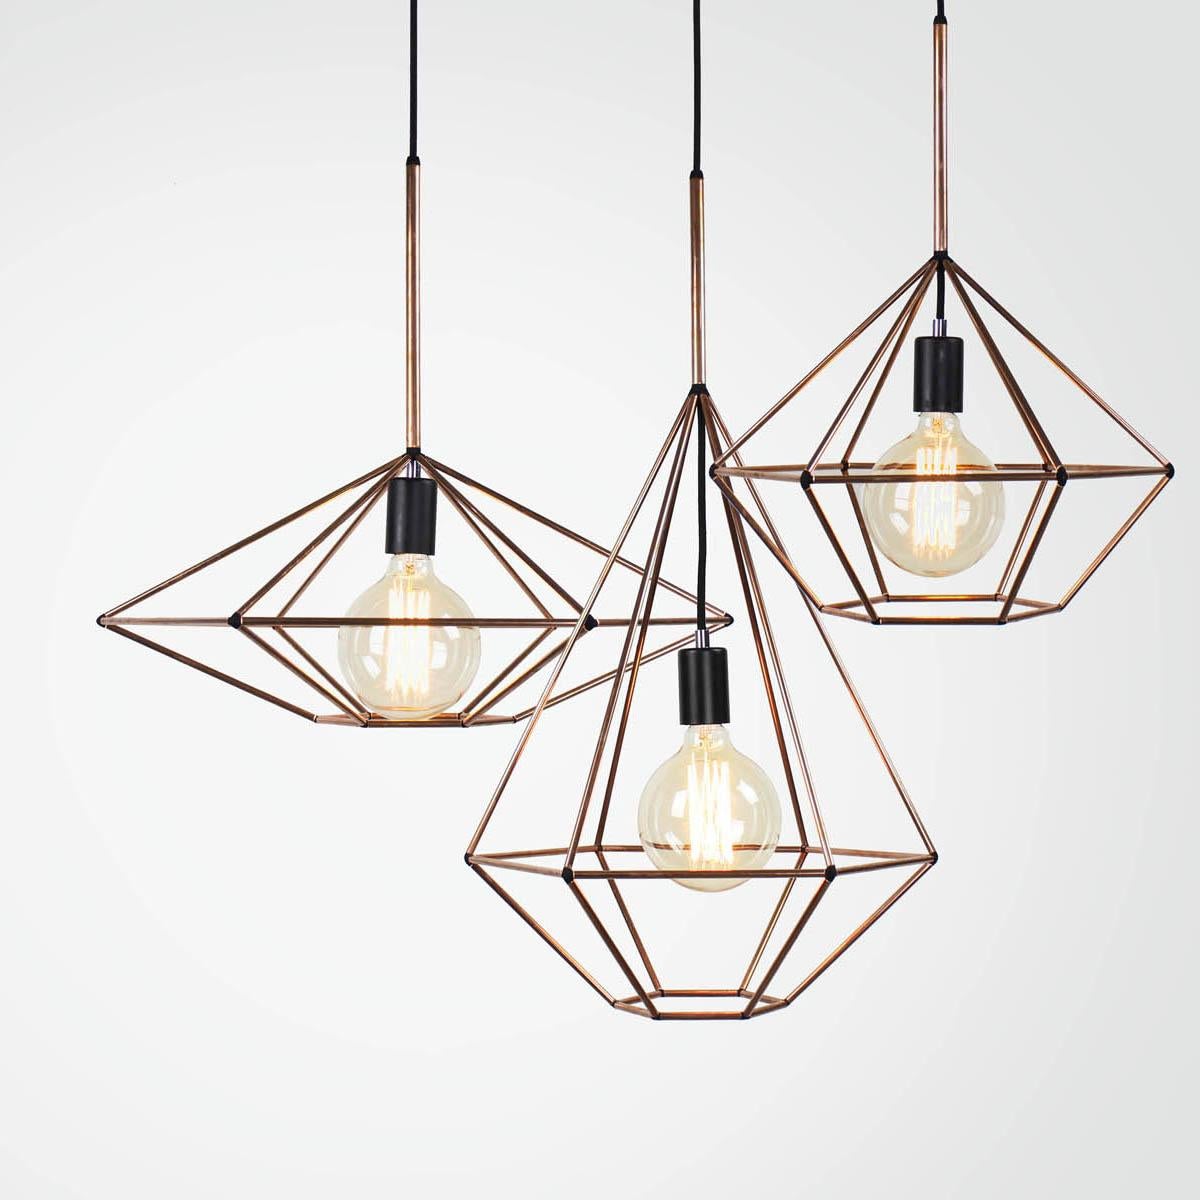 Rough diamond pendant is a decorative fixture that combines handmade craftsmanship with digital technology. The design combines a 3D printed joining system with hand cut and assembled copper or brass tube. The result is a decorative feature light